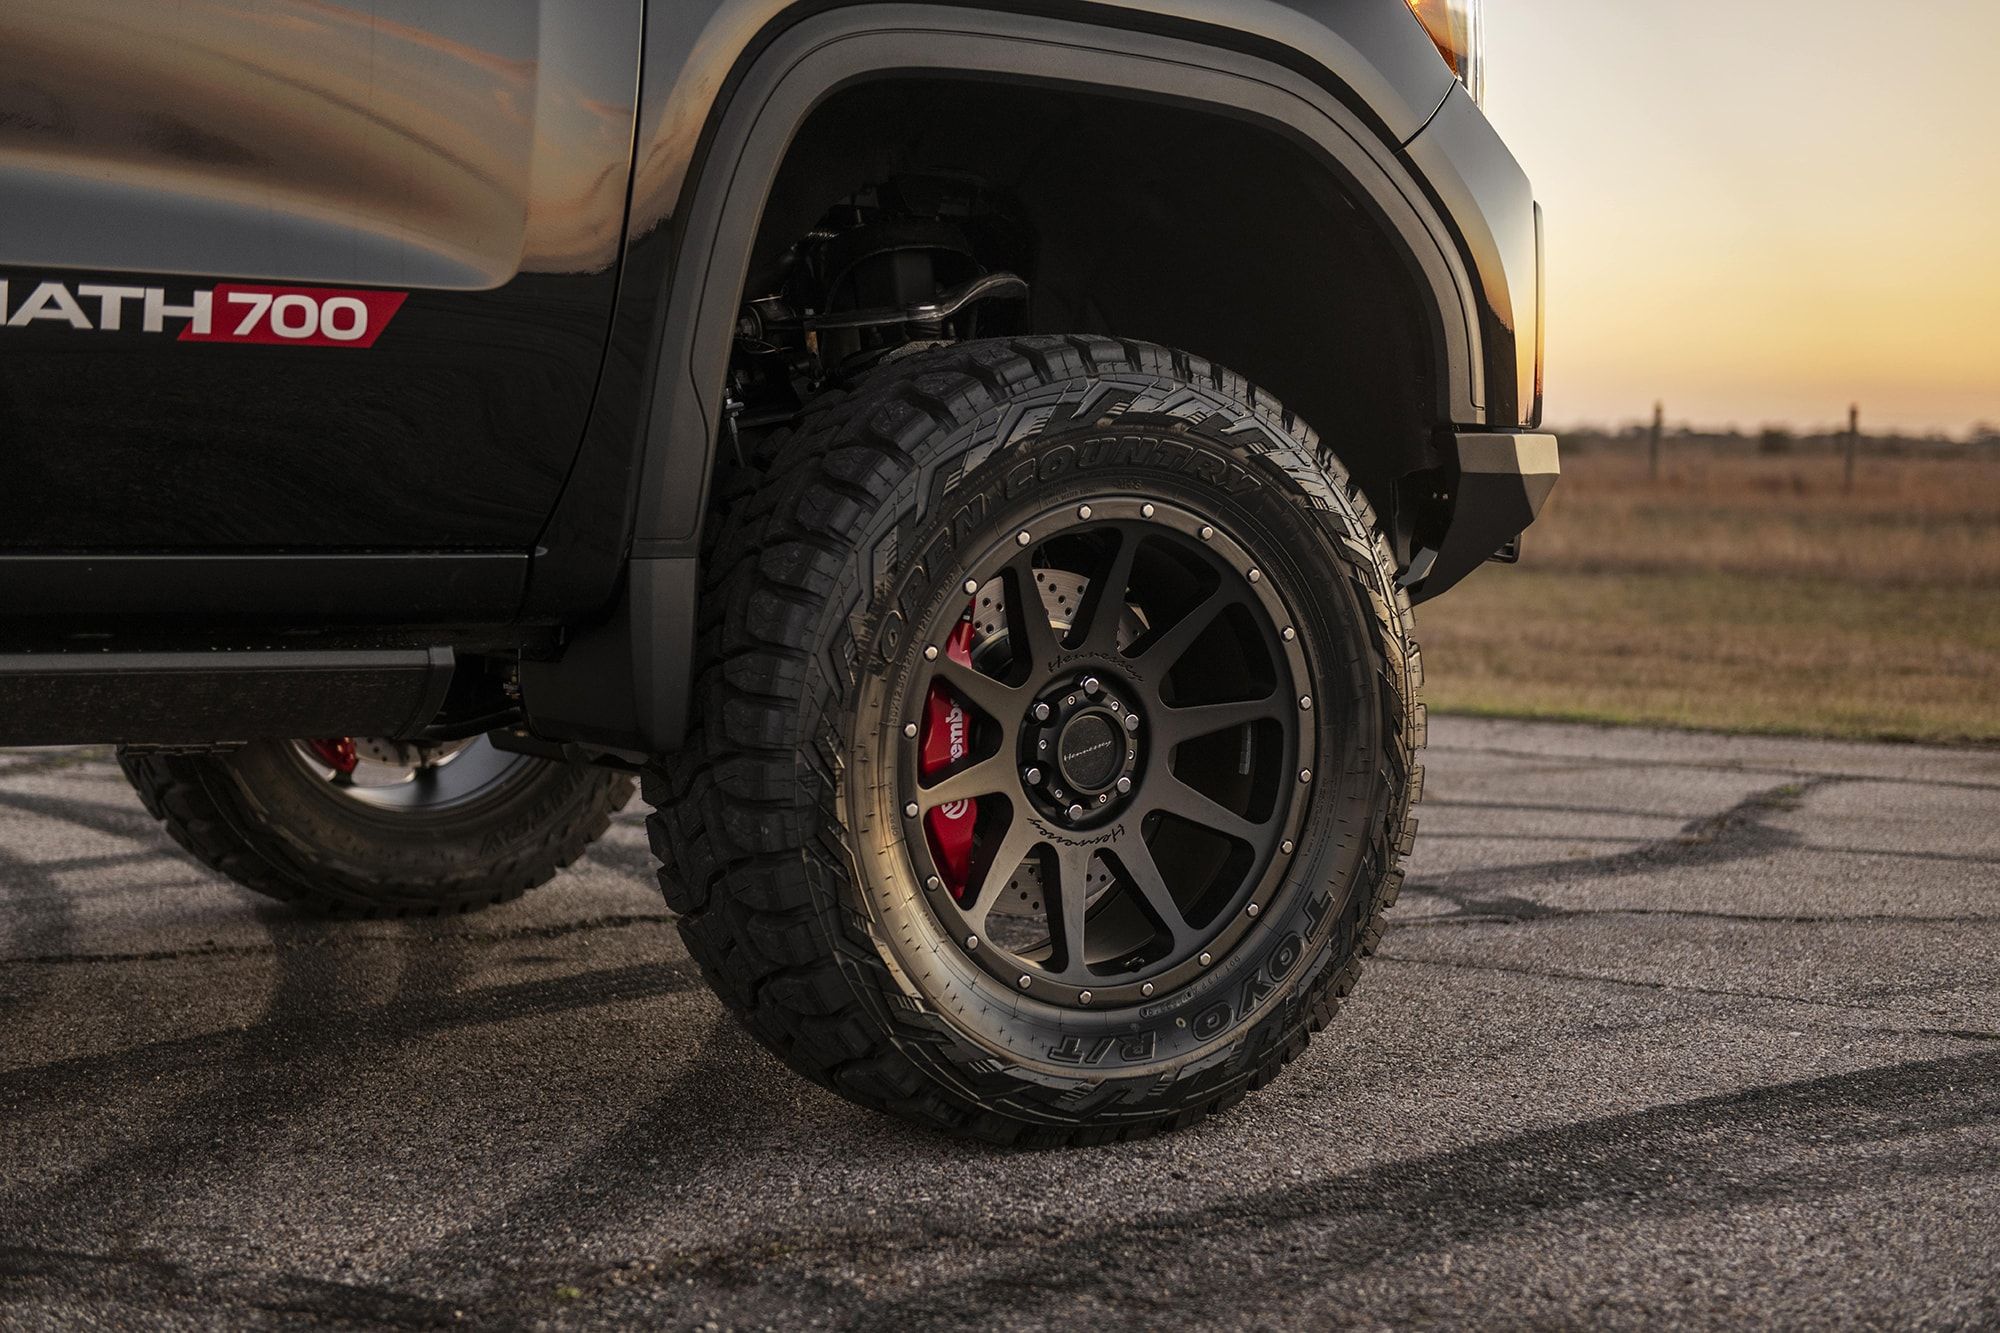 2020 Hennessey Upgrades The 2020 GMC Sierra 1500 Harley-Davidson Edition By Tuscany 